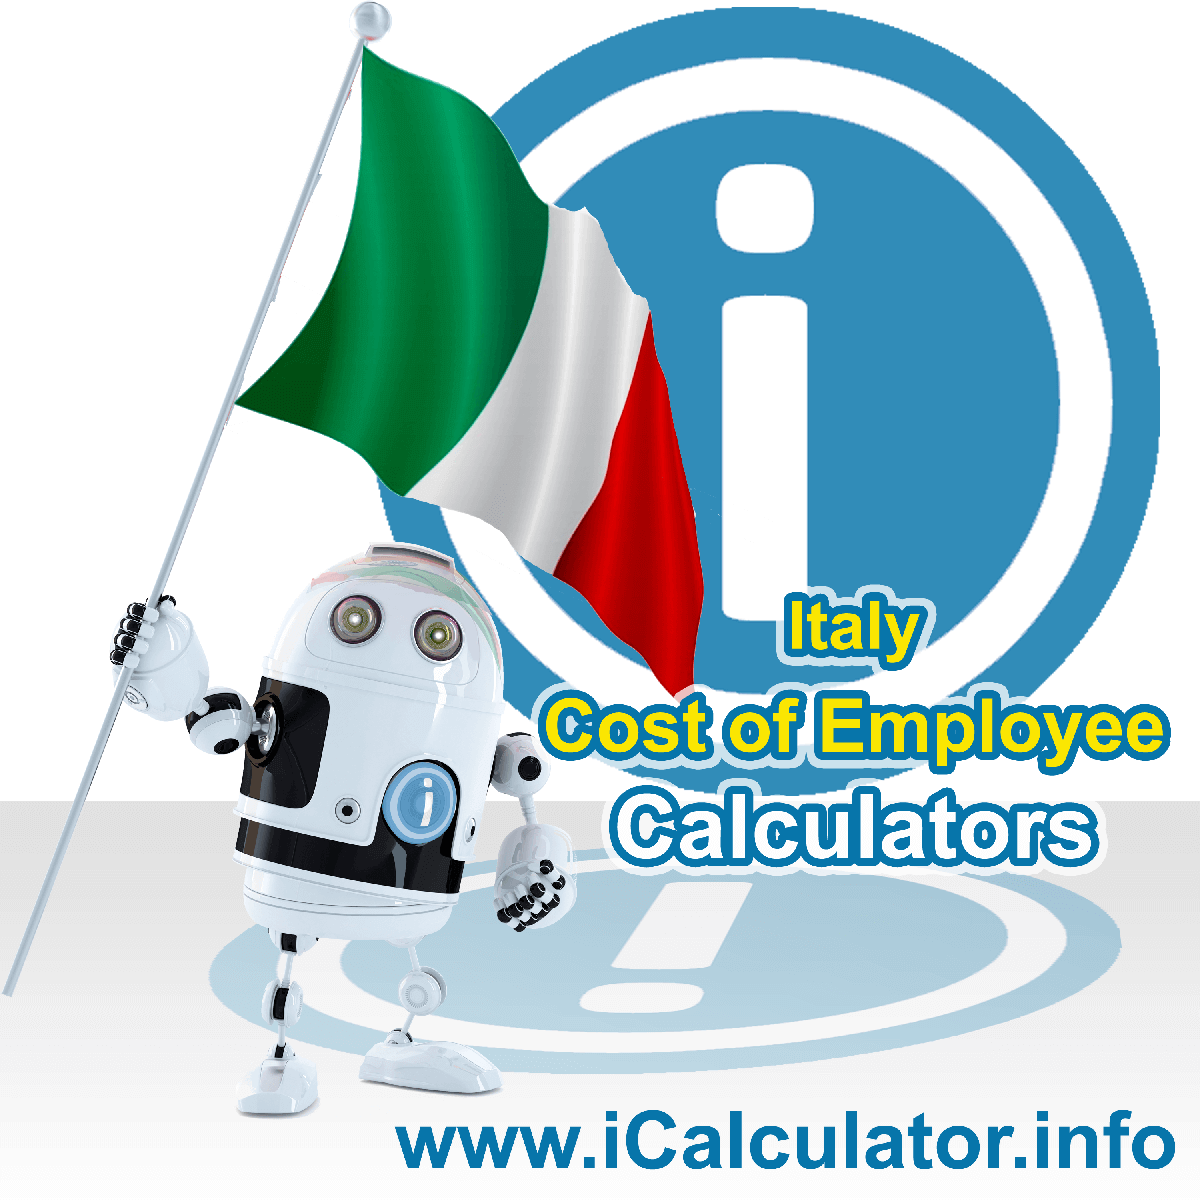 True Cost of an Employee in Italy Calculator. This image shows a new employer in Italy looking hiring a new employee, they calculate the cost of hiring an employee in Italy using the True Cost of an Employee in Italy calculator to understand their employment cost in Italy in 2019